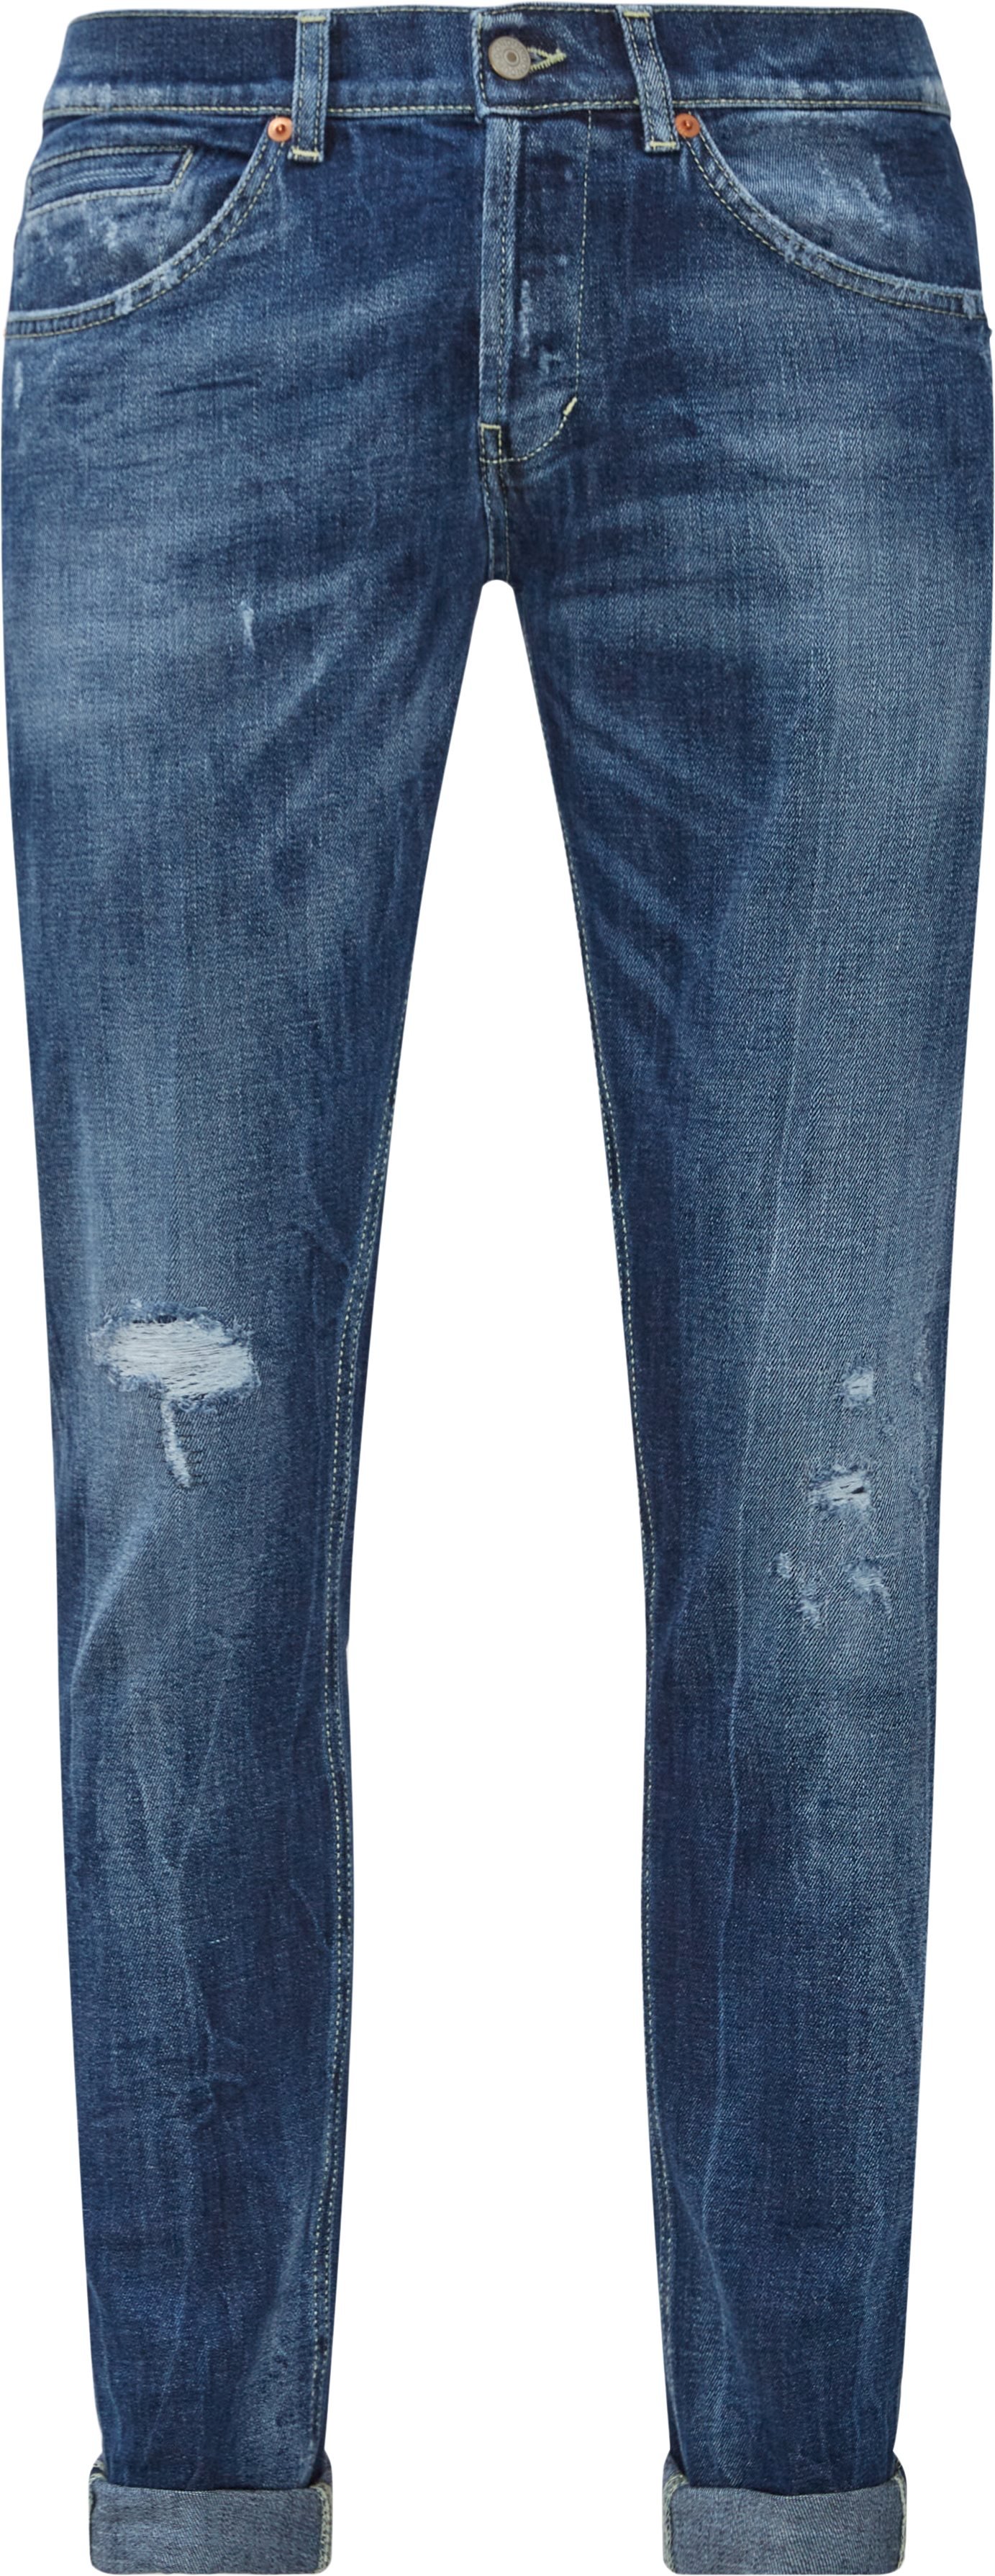 George Jeans - Jeans - Skinny fit - Blue